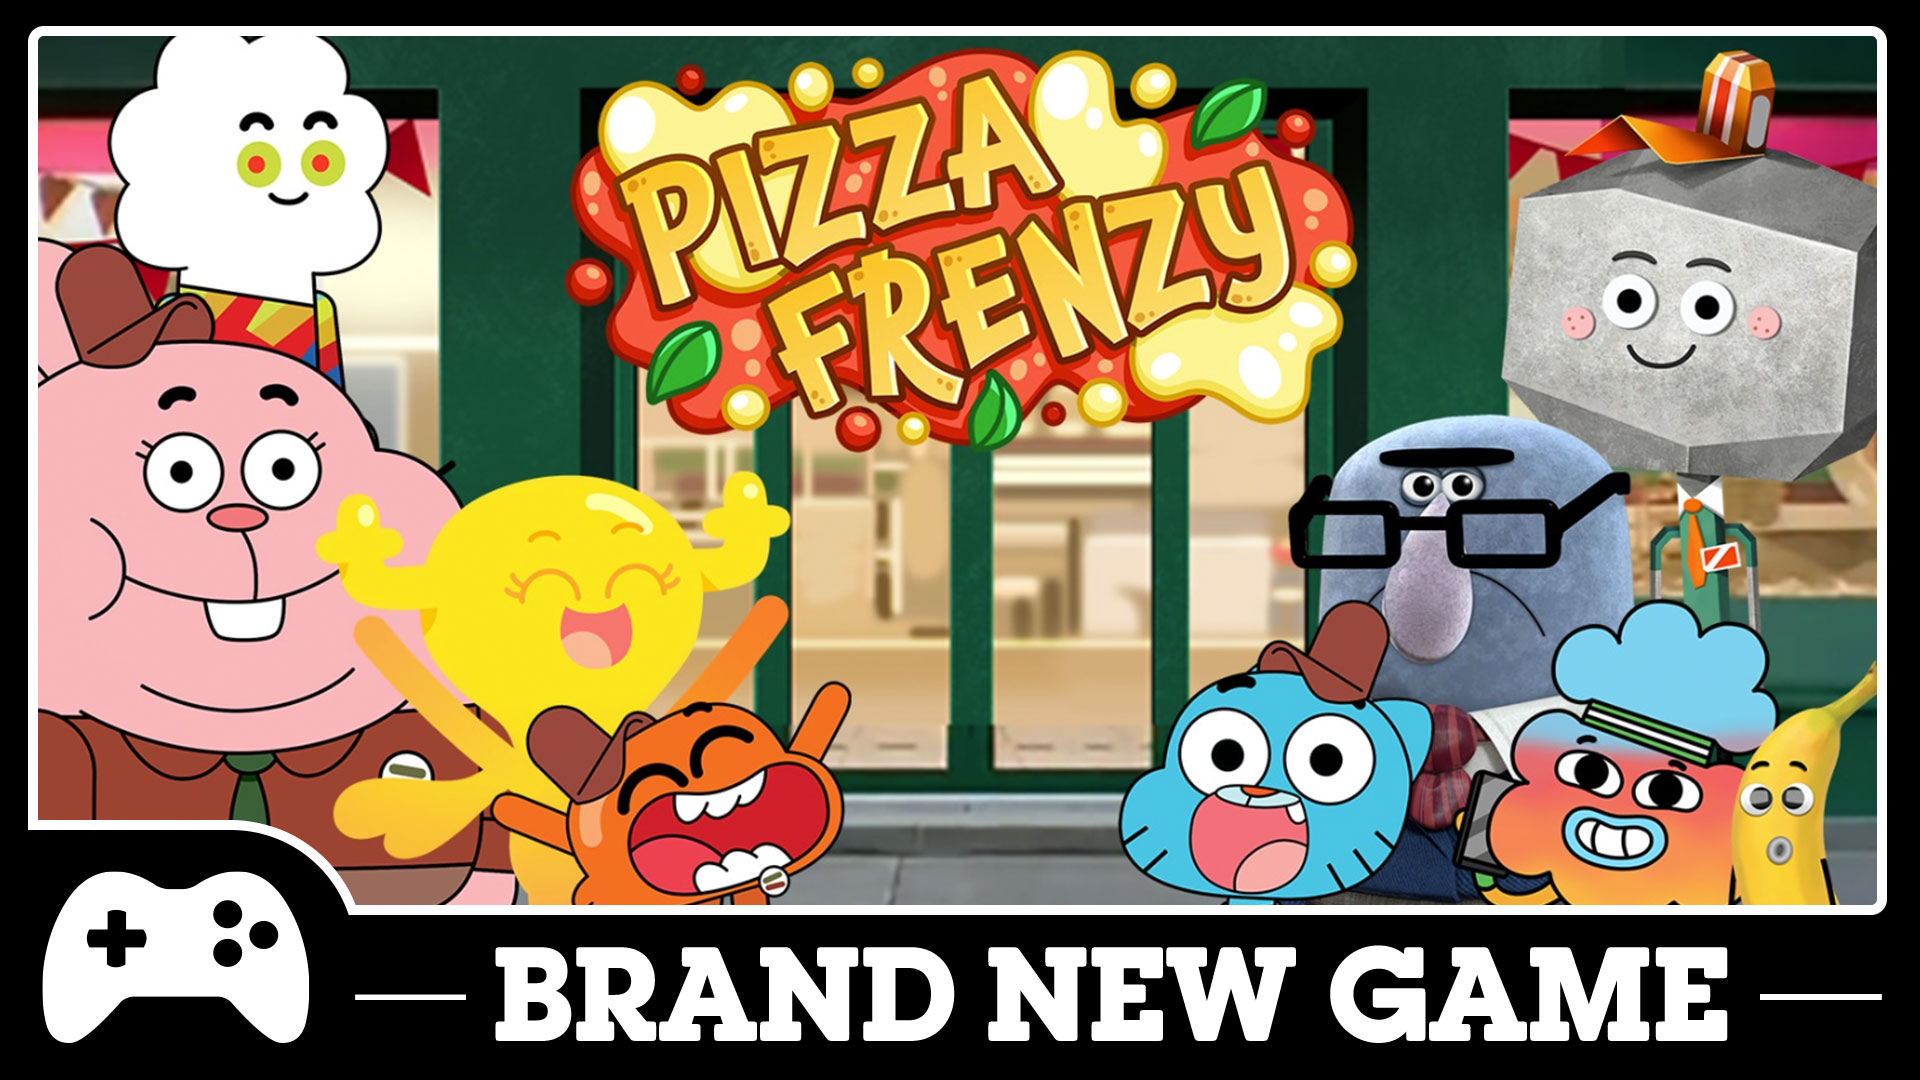 Play The Amazing World of Gumball games